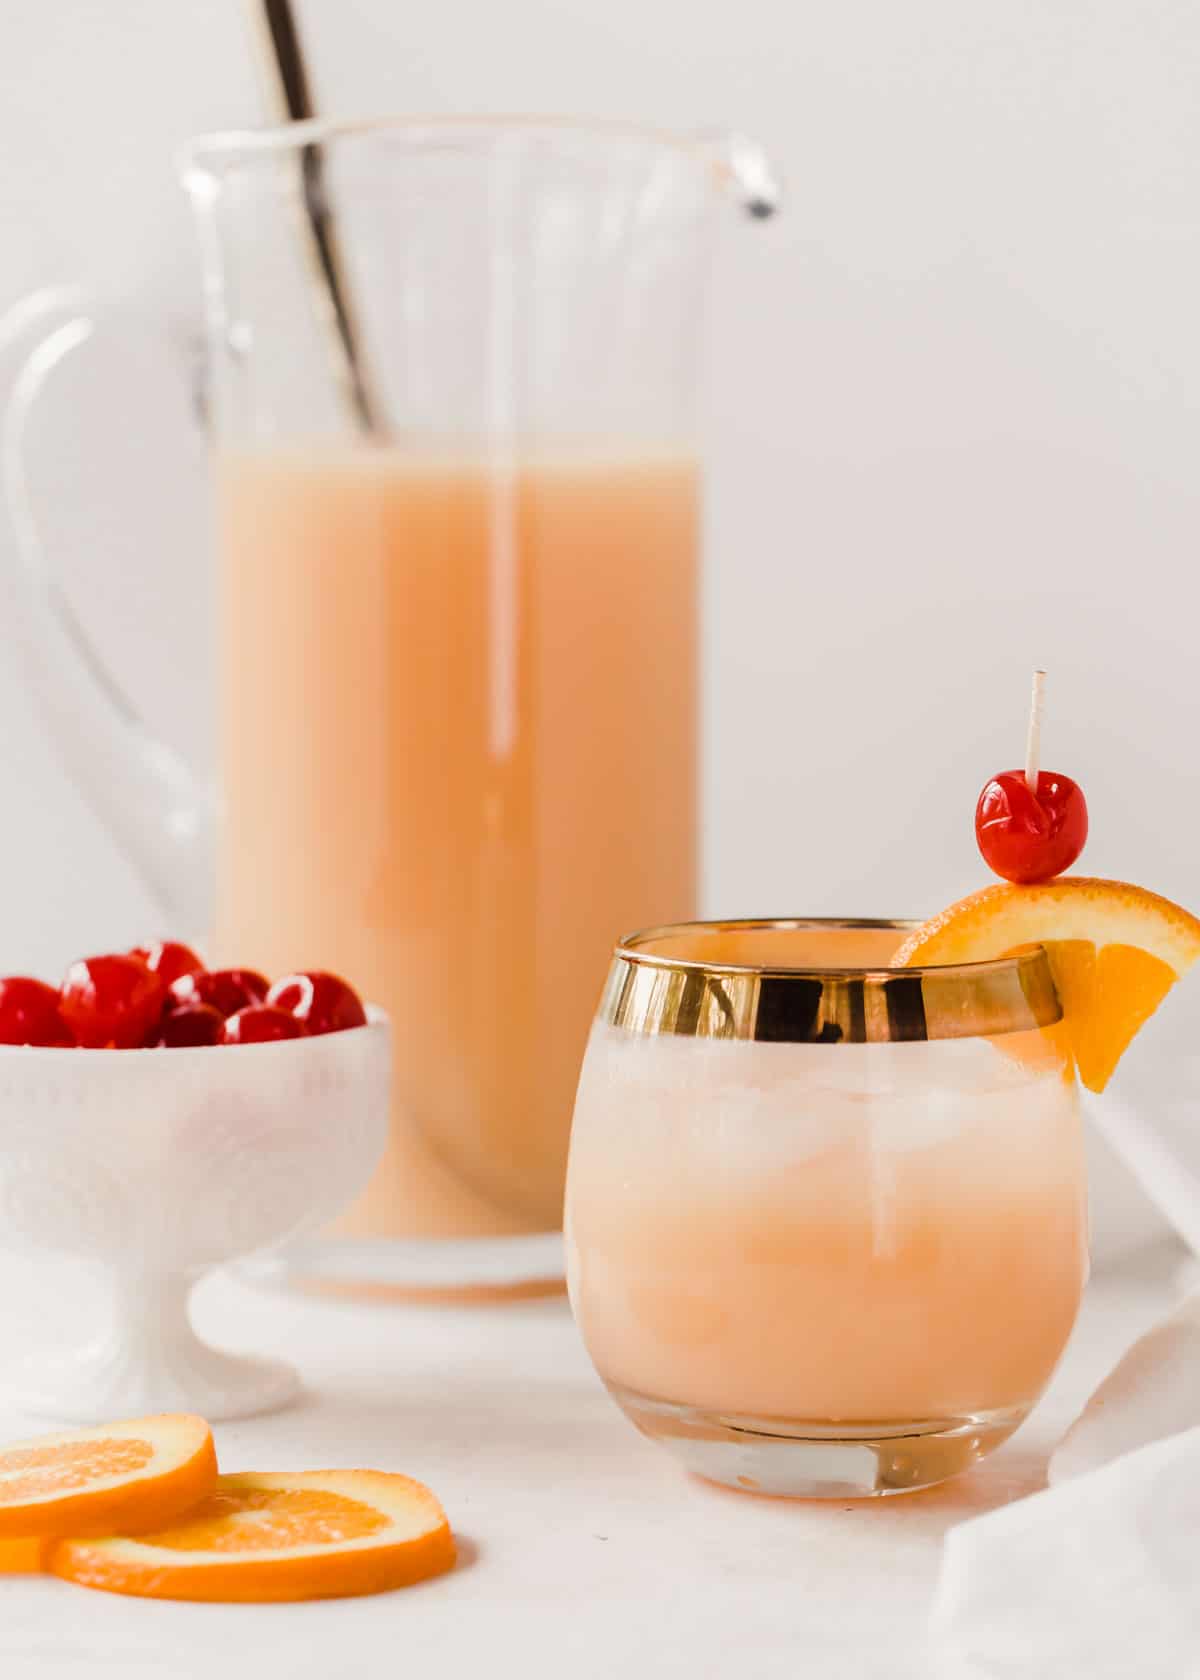 glass of orange drink with orange and cherry garnish, full pitcher in background and dish filled with cherries.